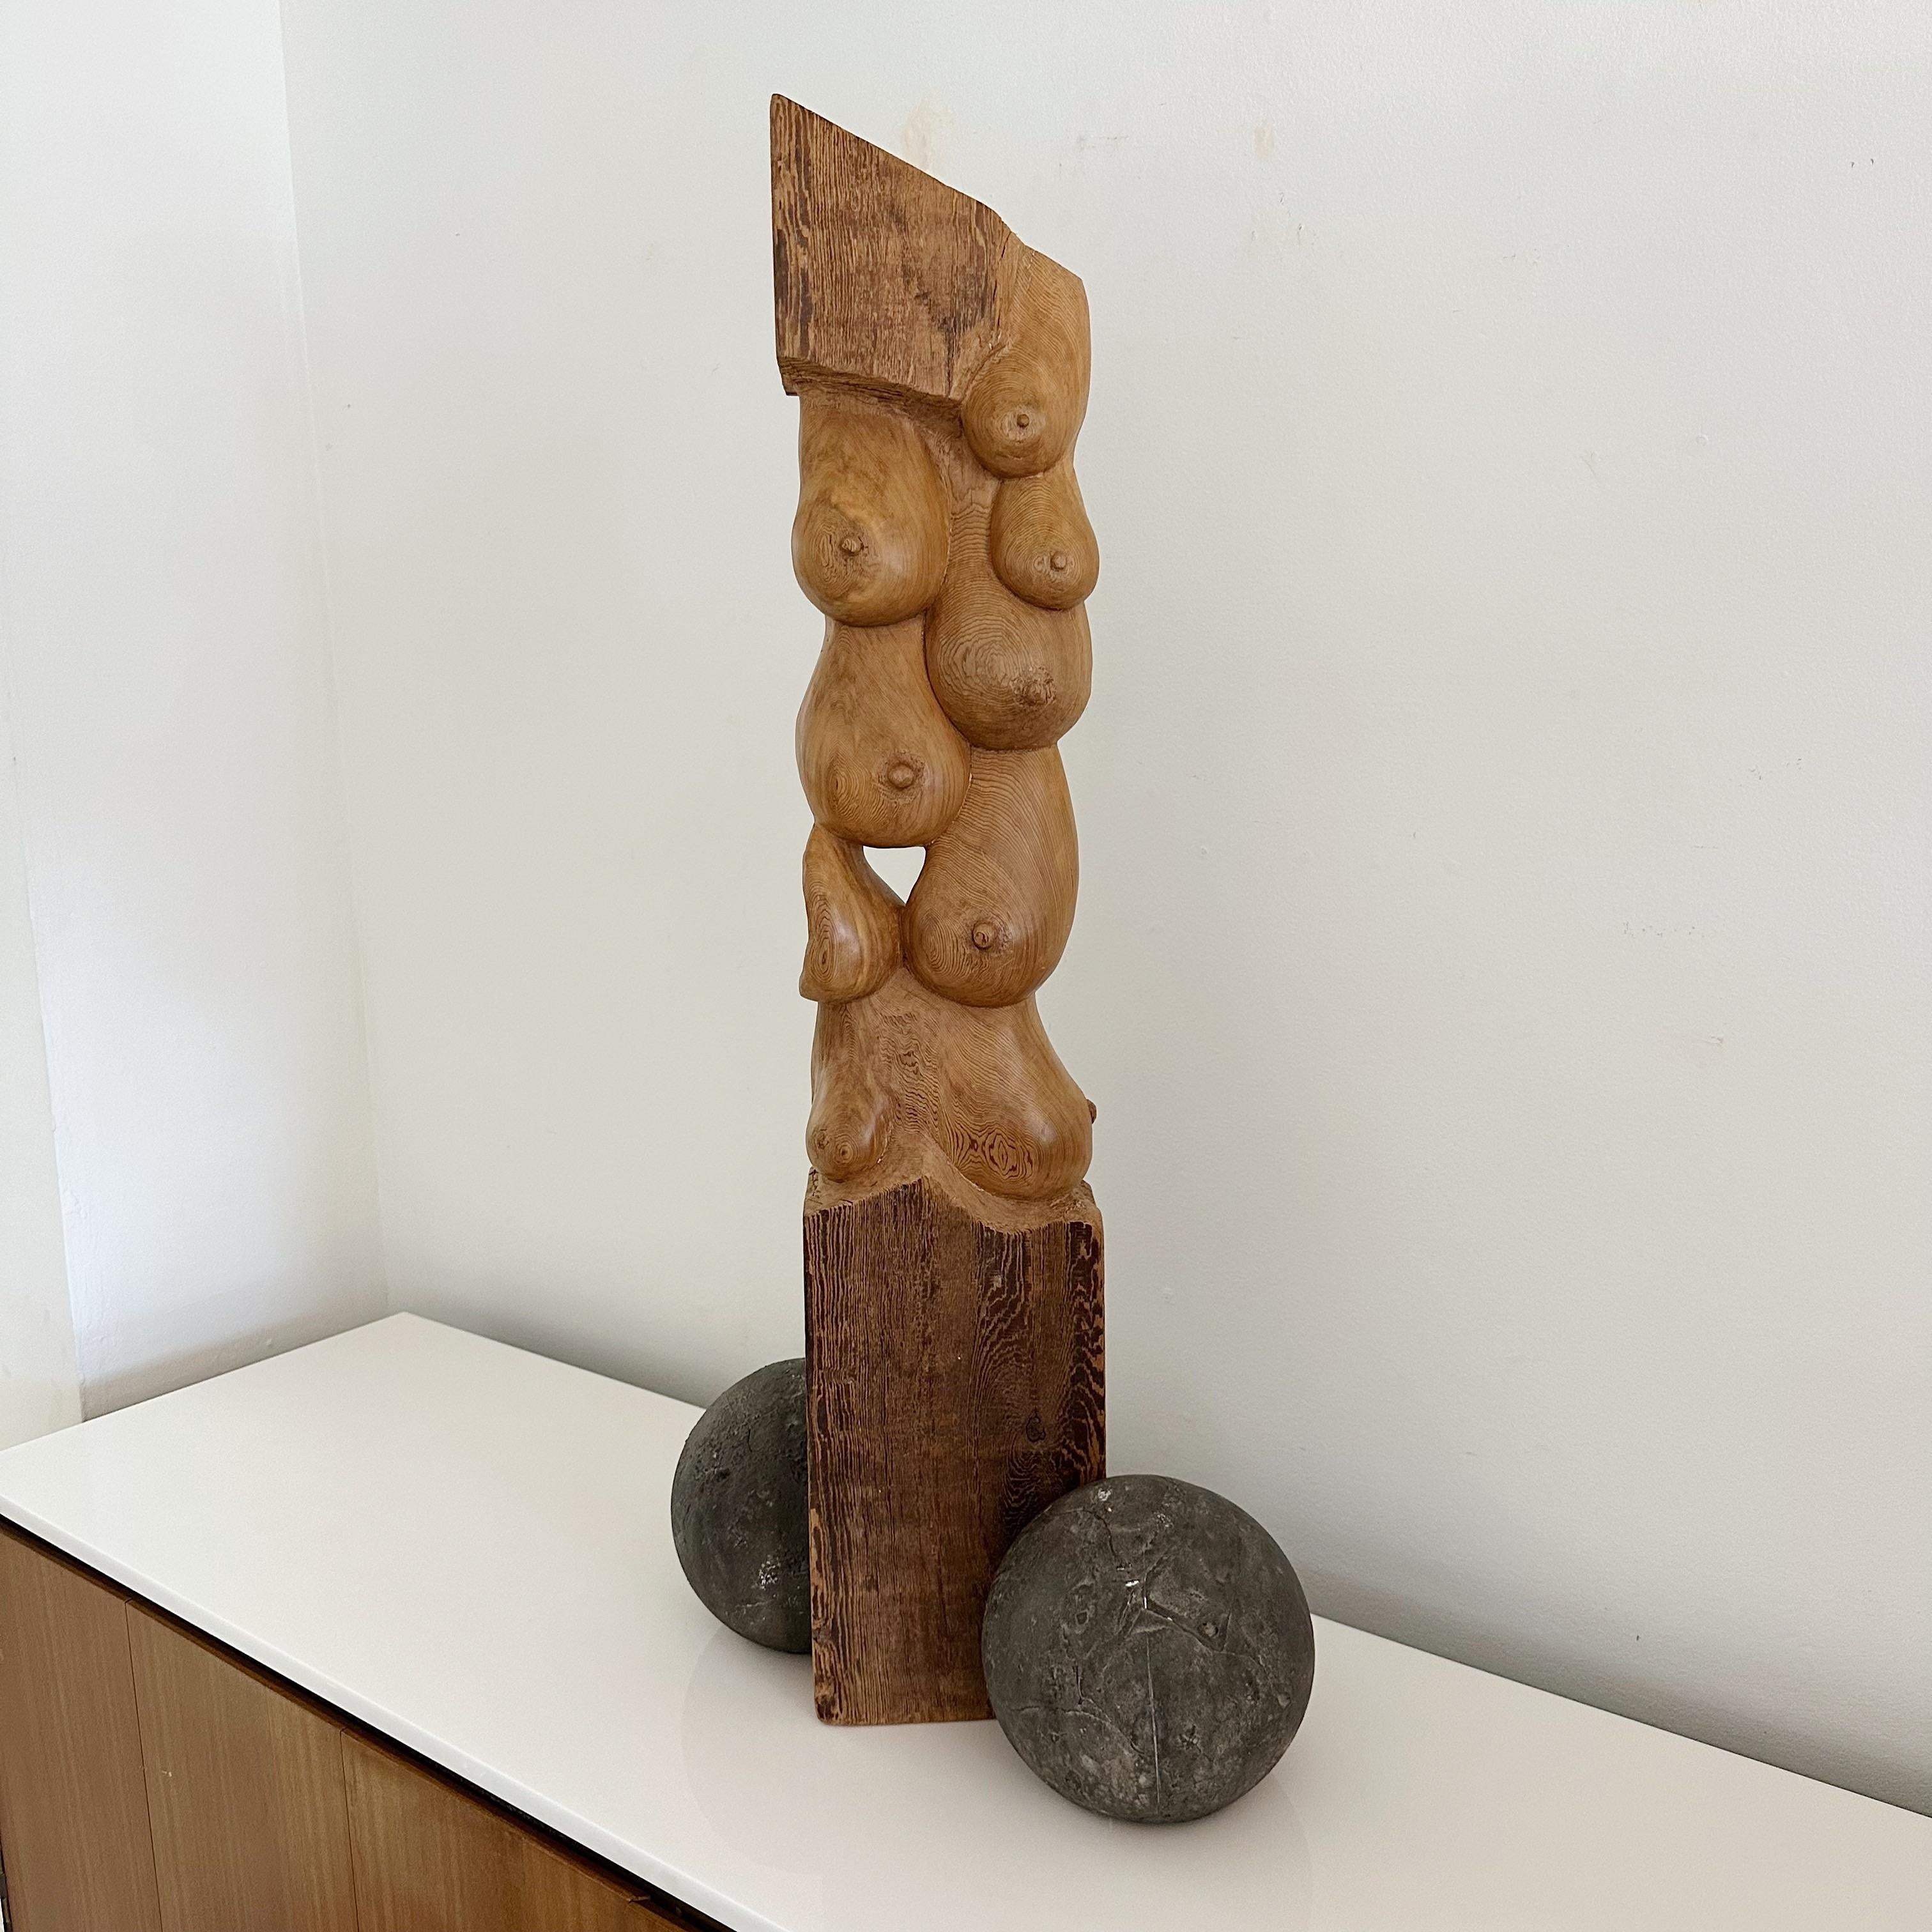 Striking Female Form Abstract Carved Wood Sculpture by Talented Artist Orlando Chiang from the early 2000s. 
Exceptional carved wood sculpture depicting the female form. Crafted by the talented artist Orlando Chiang in his studio, this sculpture is